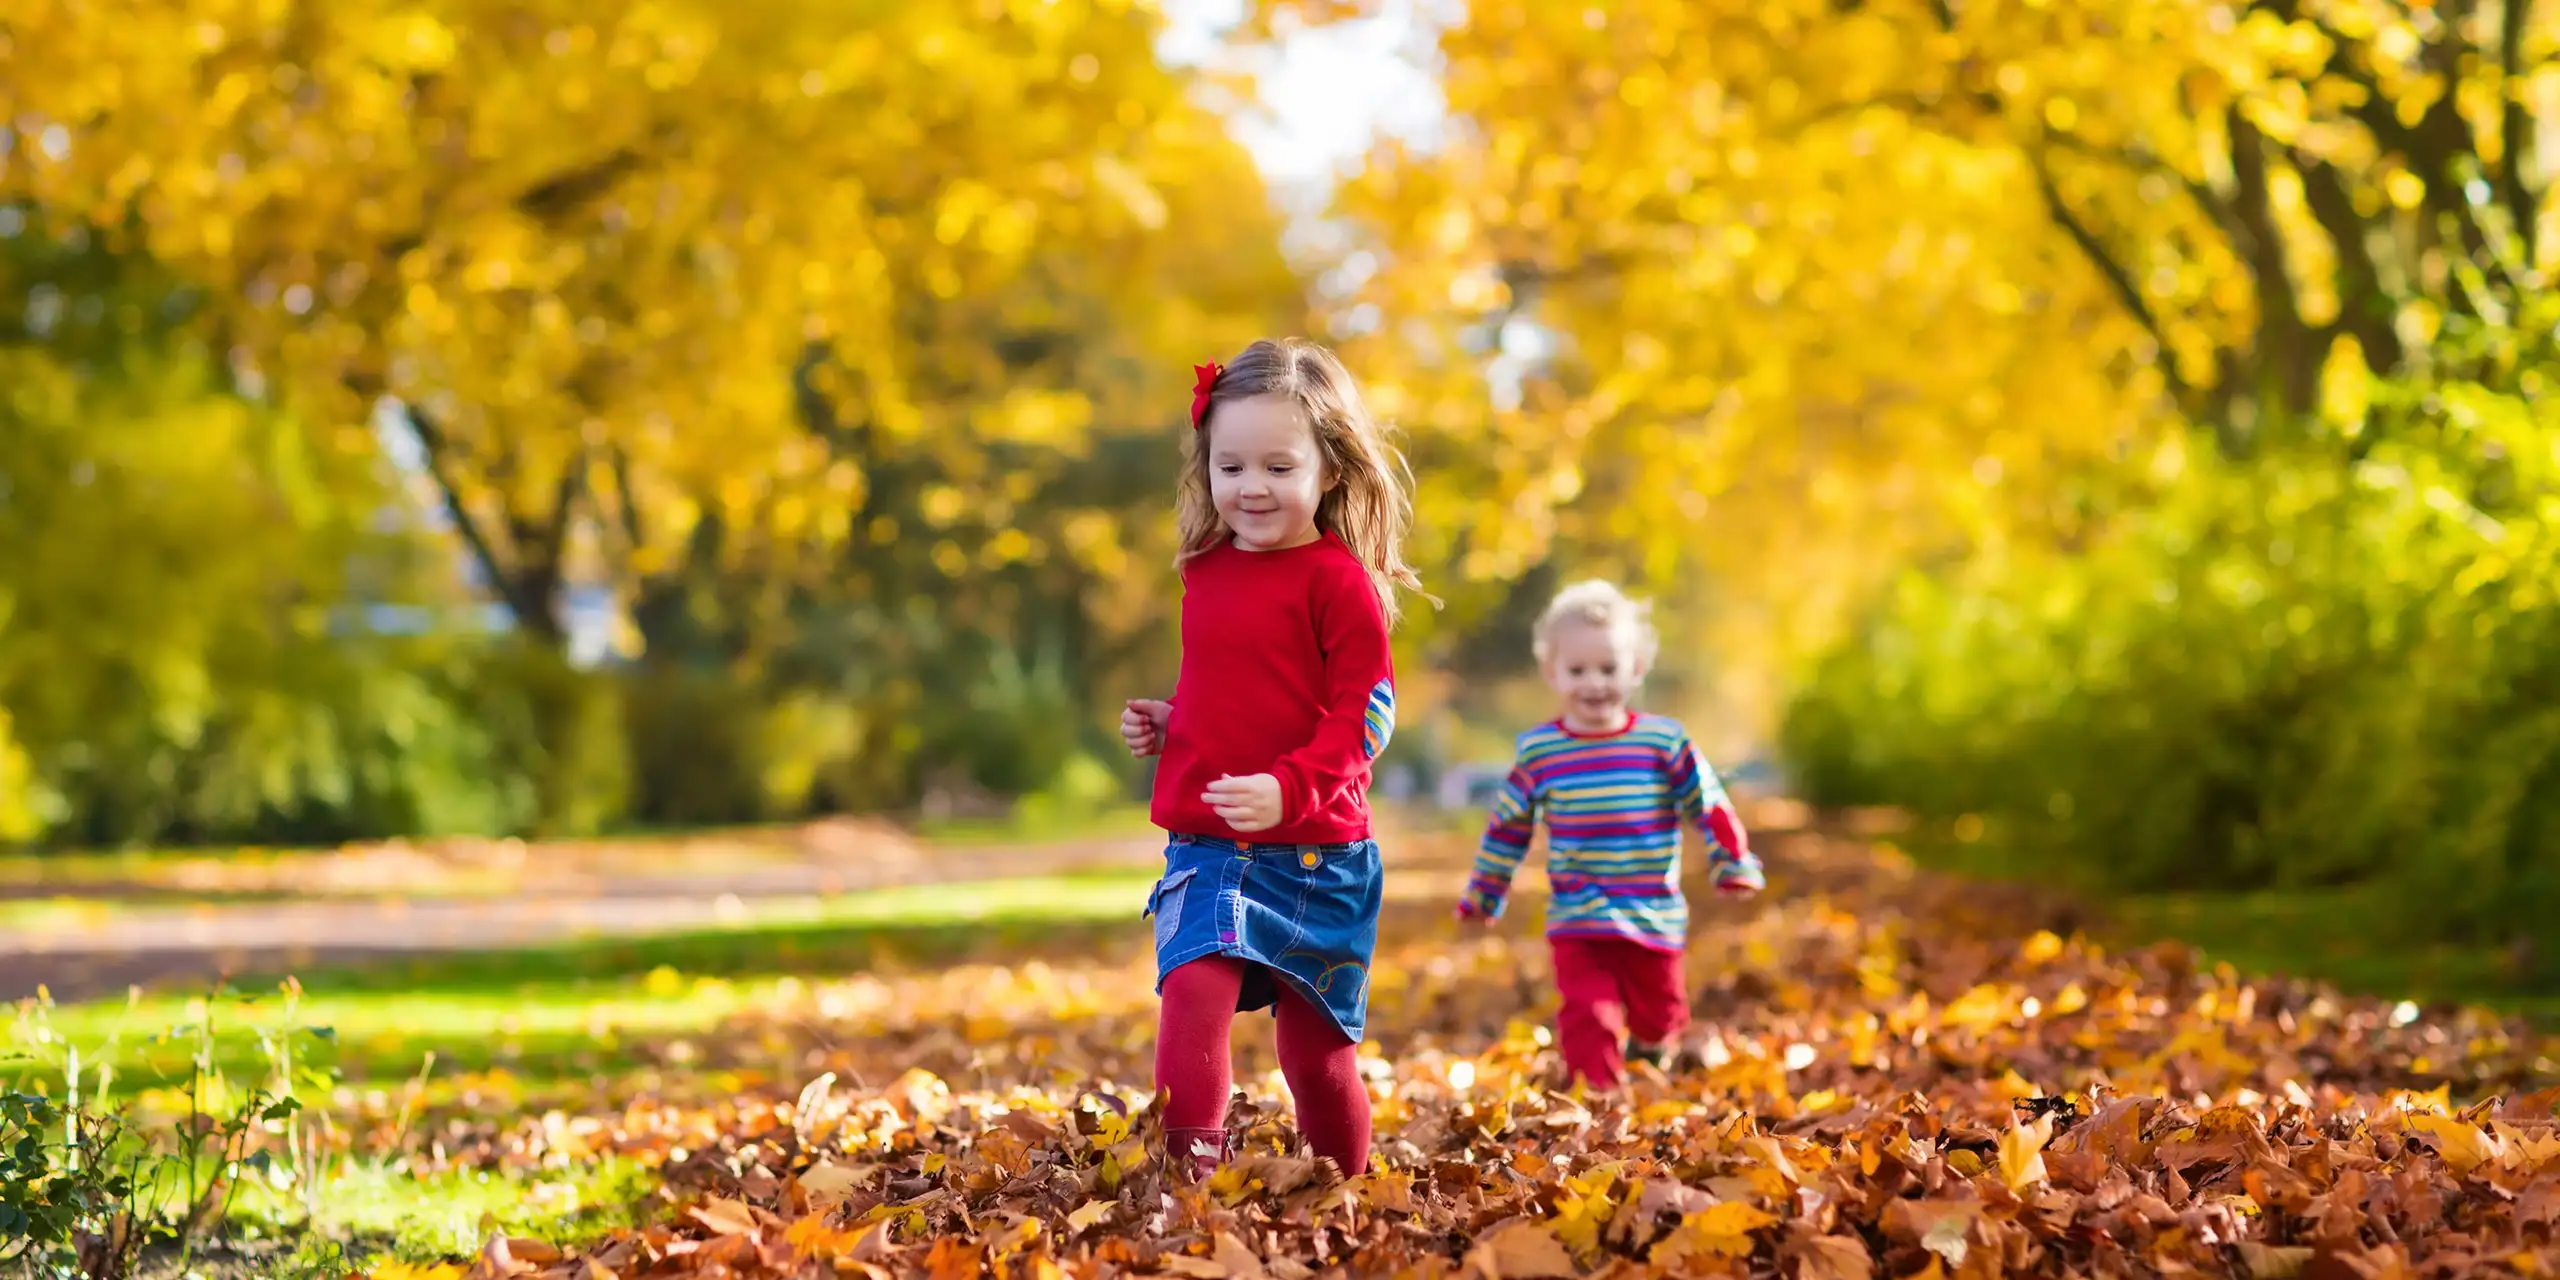 Kids Playing in Fall Leaves; Courtesy of FamVeld/Shutterstock.com